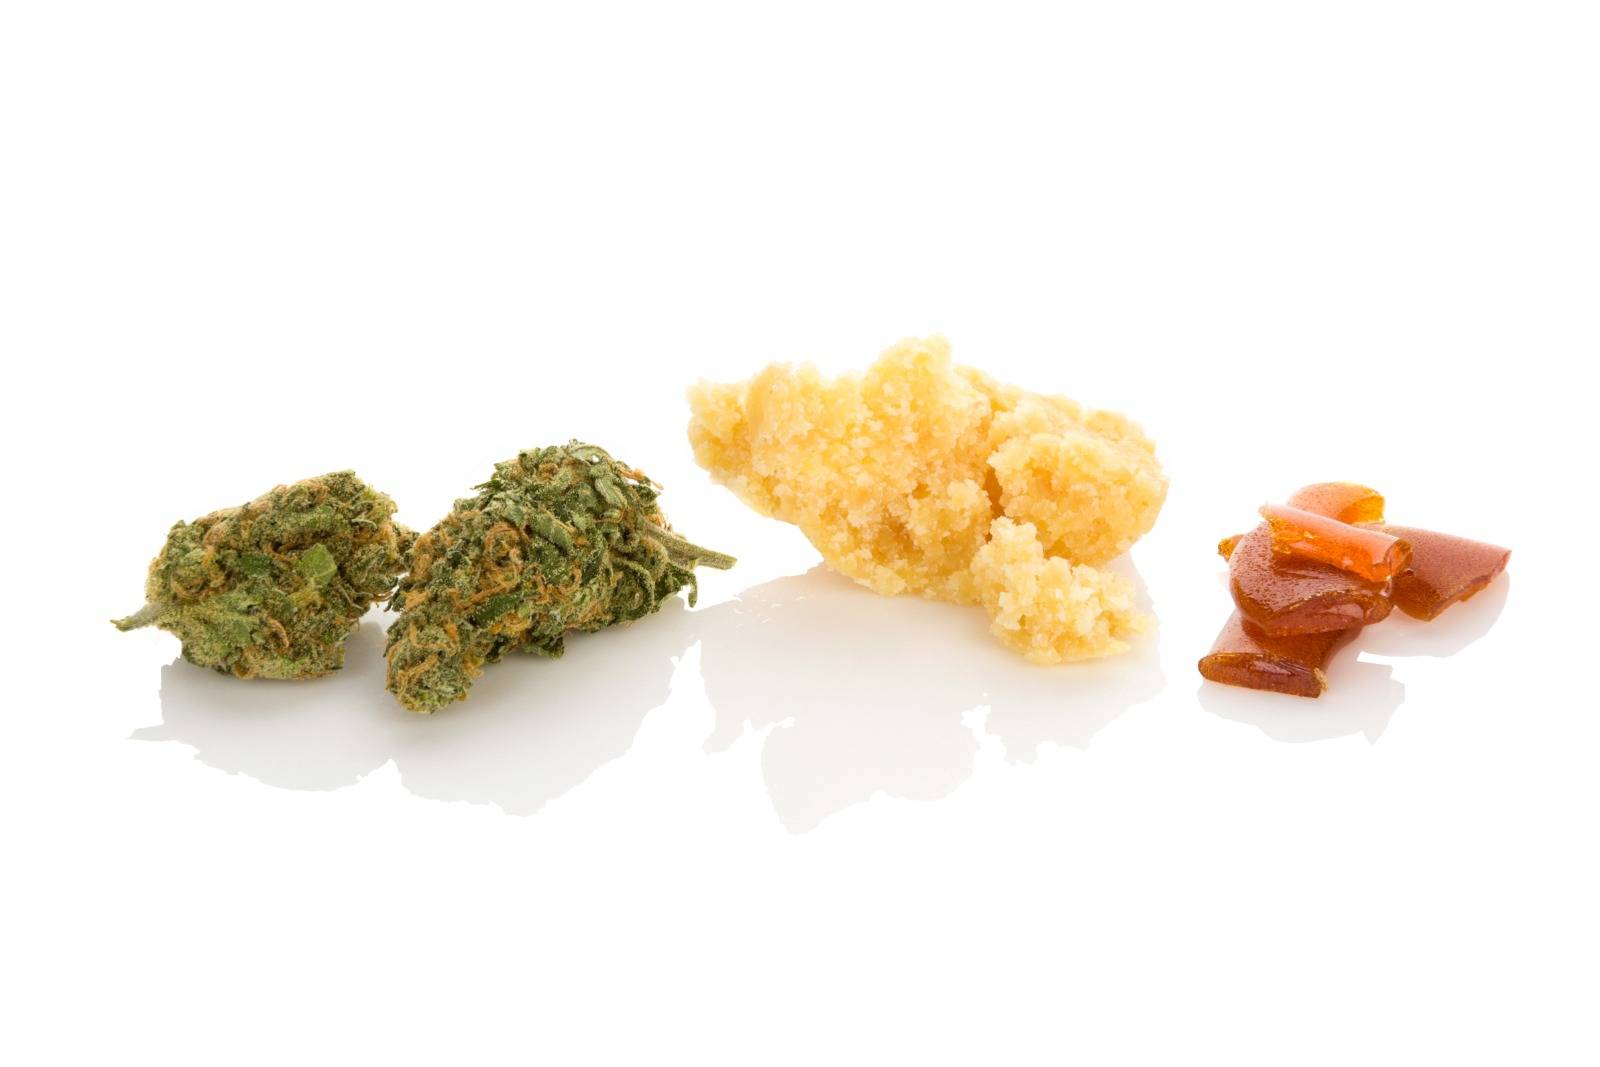 Find quality cannabis concentrates shatter, bud and crumble at Speed Greens